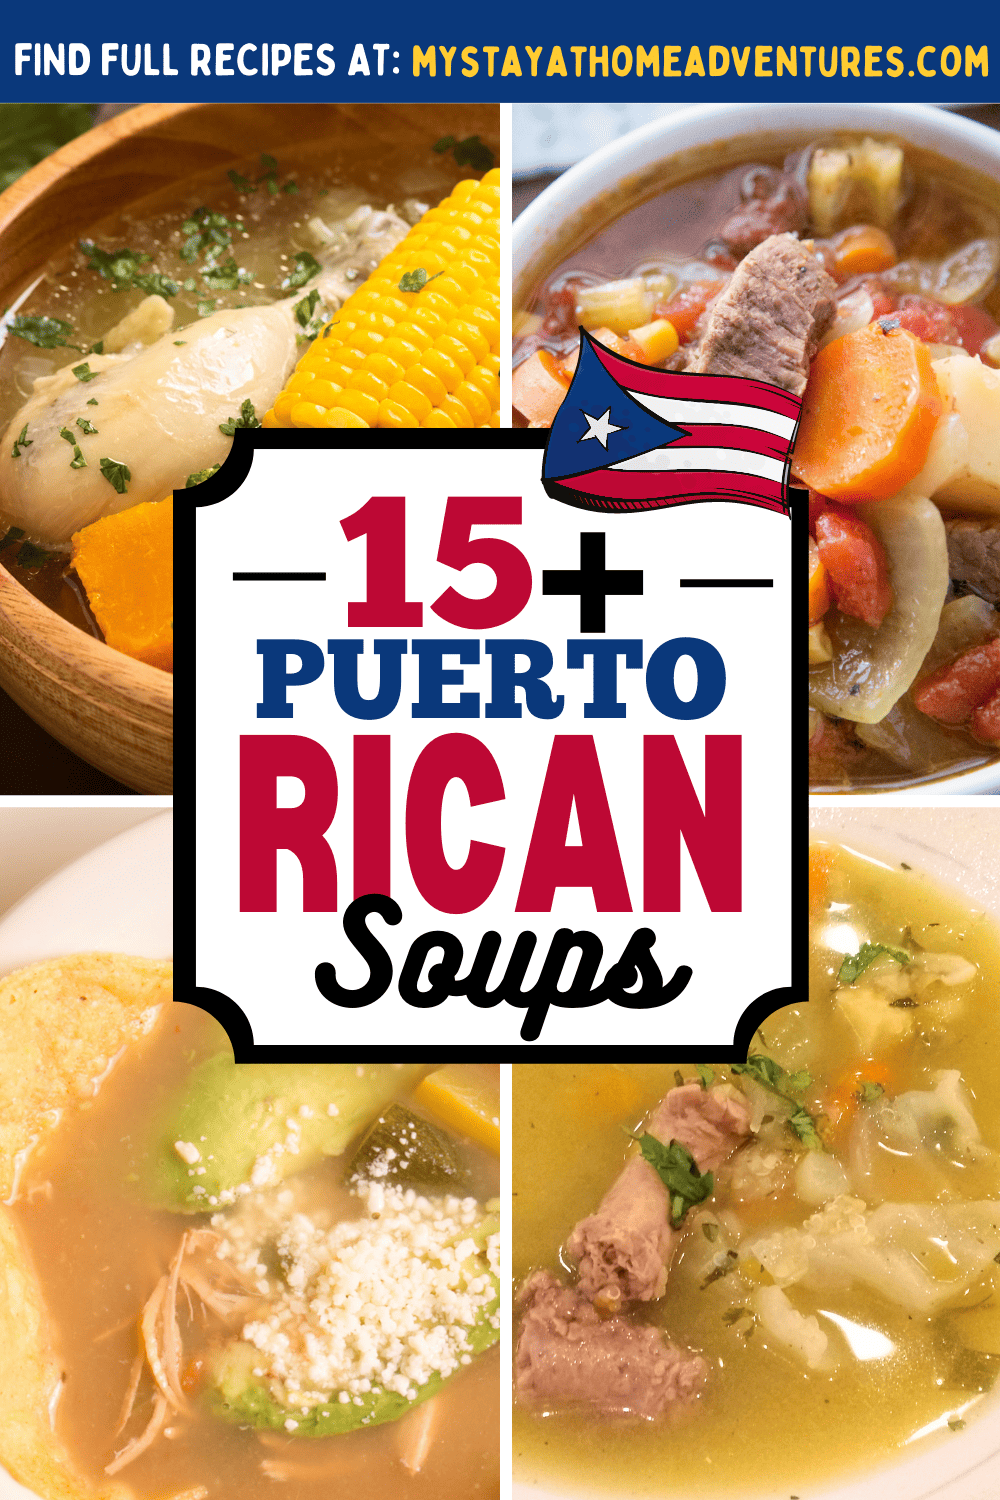 Warm up your taste buds with these mouth-watering Puerto Rican soup recipes! From sancocho to asopao, we've got you covered. via @mystayathome